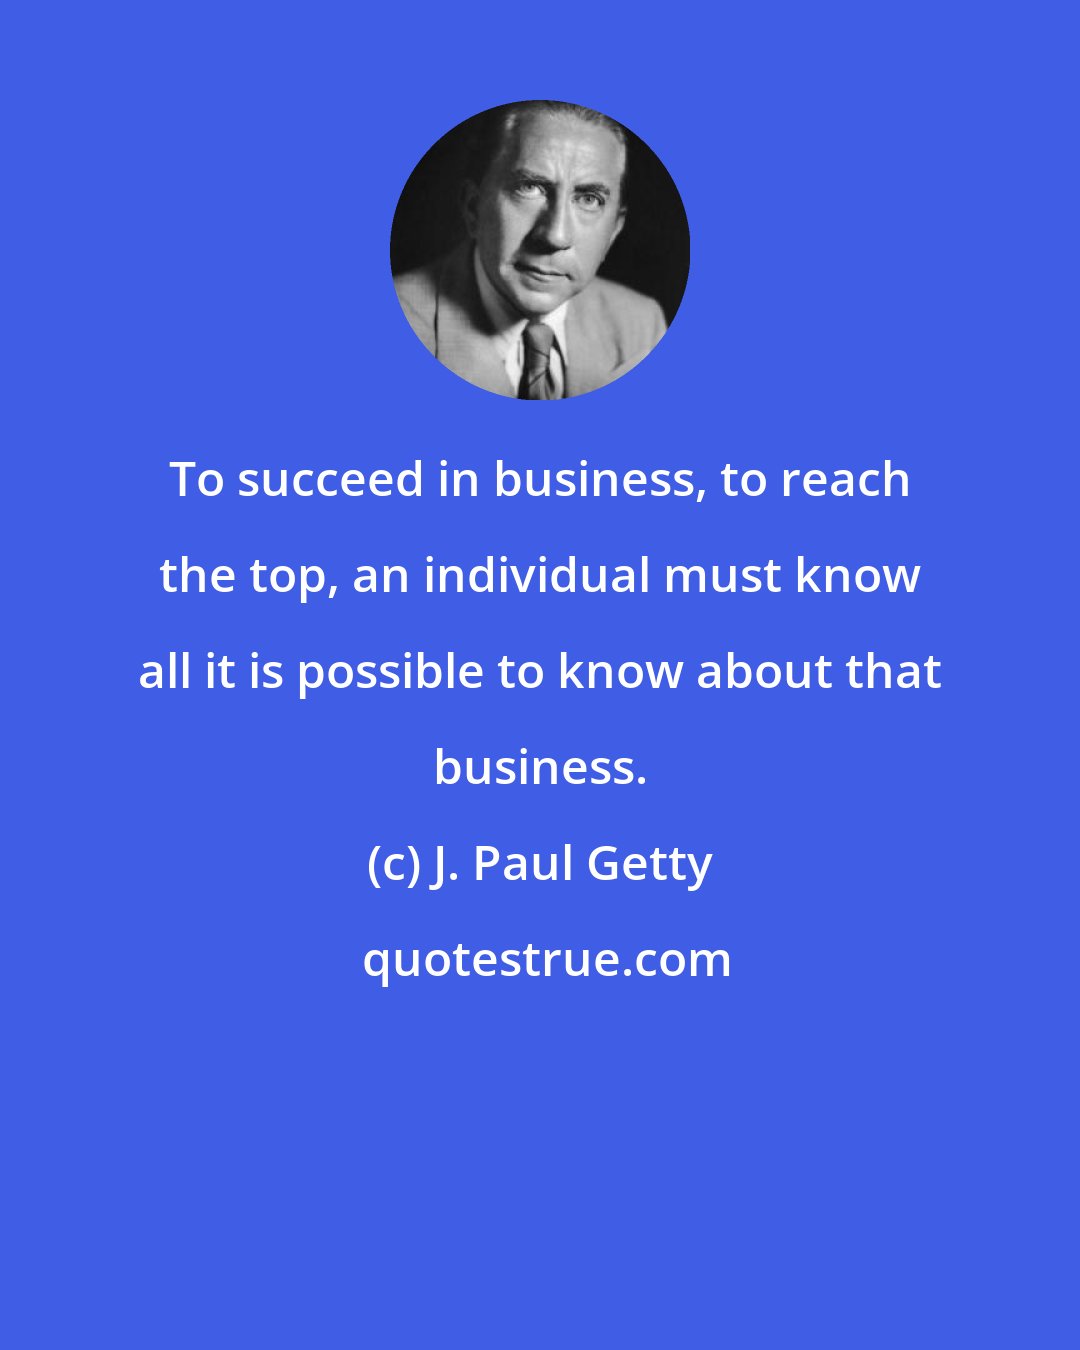 J. Paul Getty: To succeed in business, to reach the top, an individual must know all it is possible to know about that business.